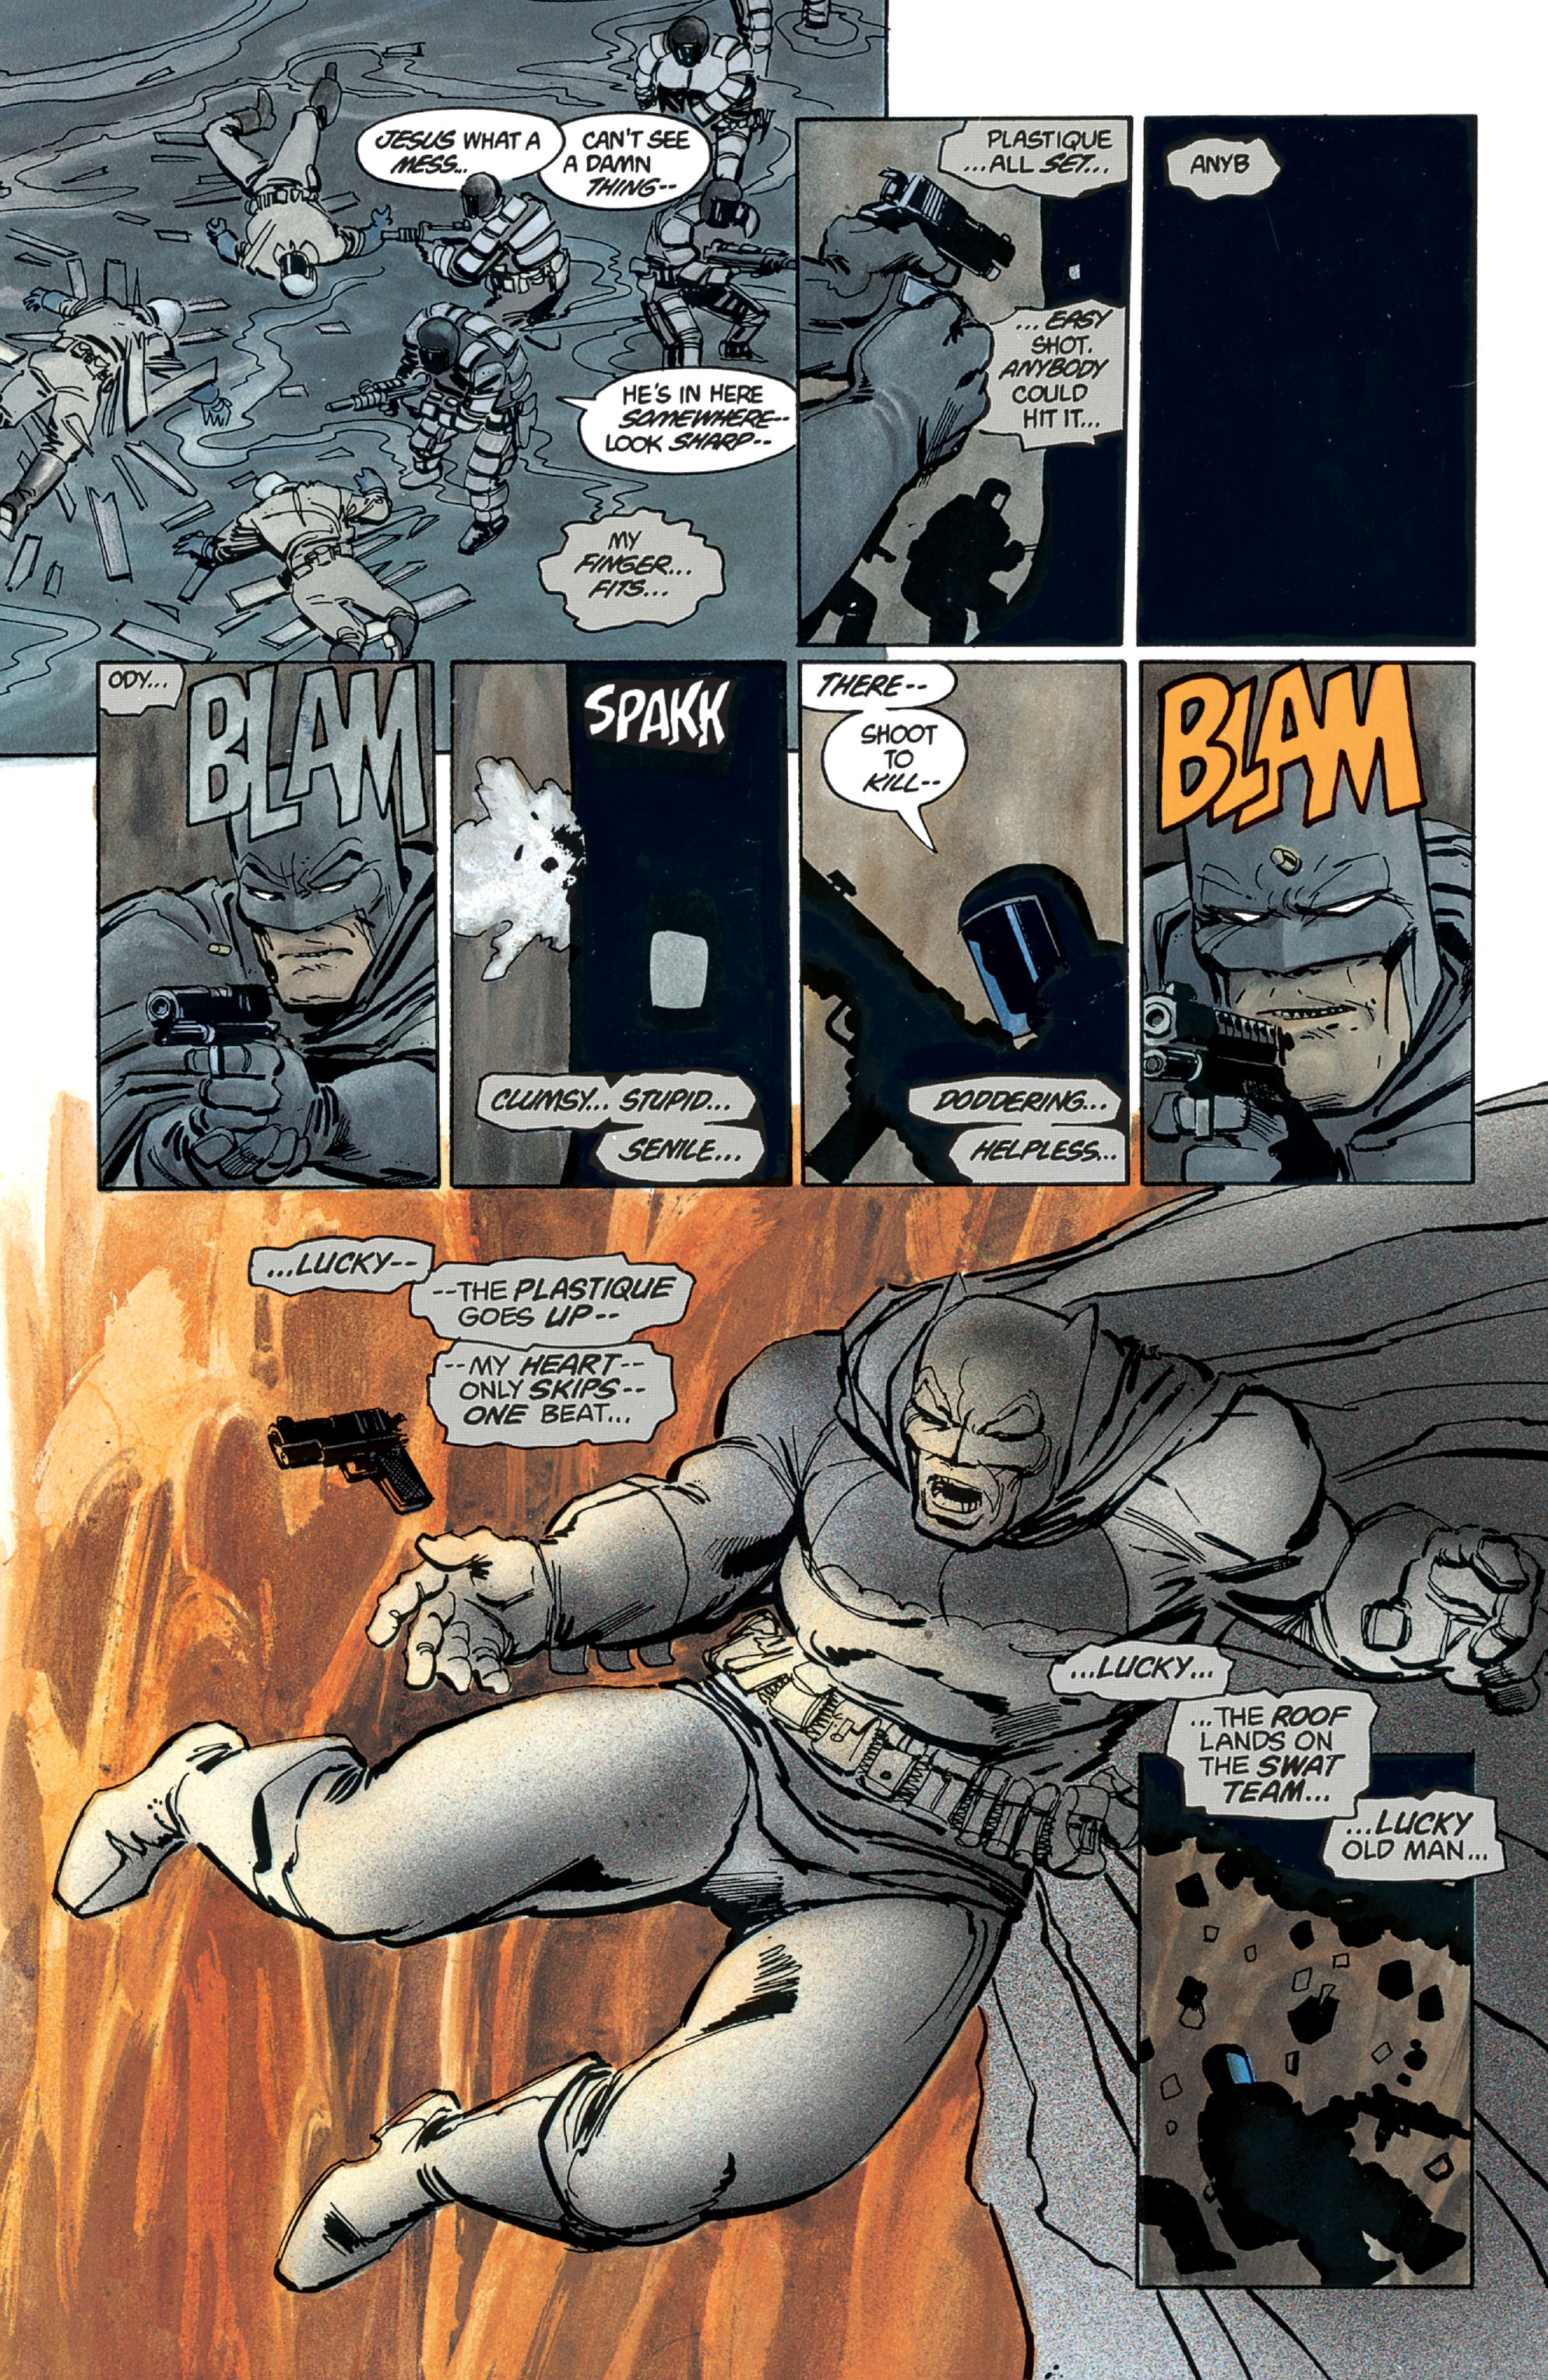 Batman The Dark Knight Returns Issue 4 | Read Batman The Dark Knight Returns  Issue 4 comic online in high quality. Read Full Comic online for free -  Read comics online in